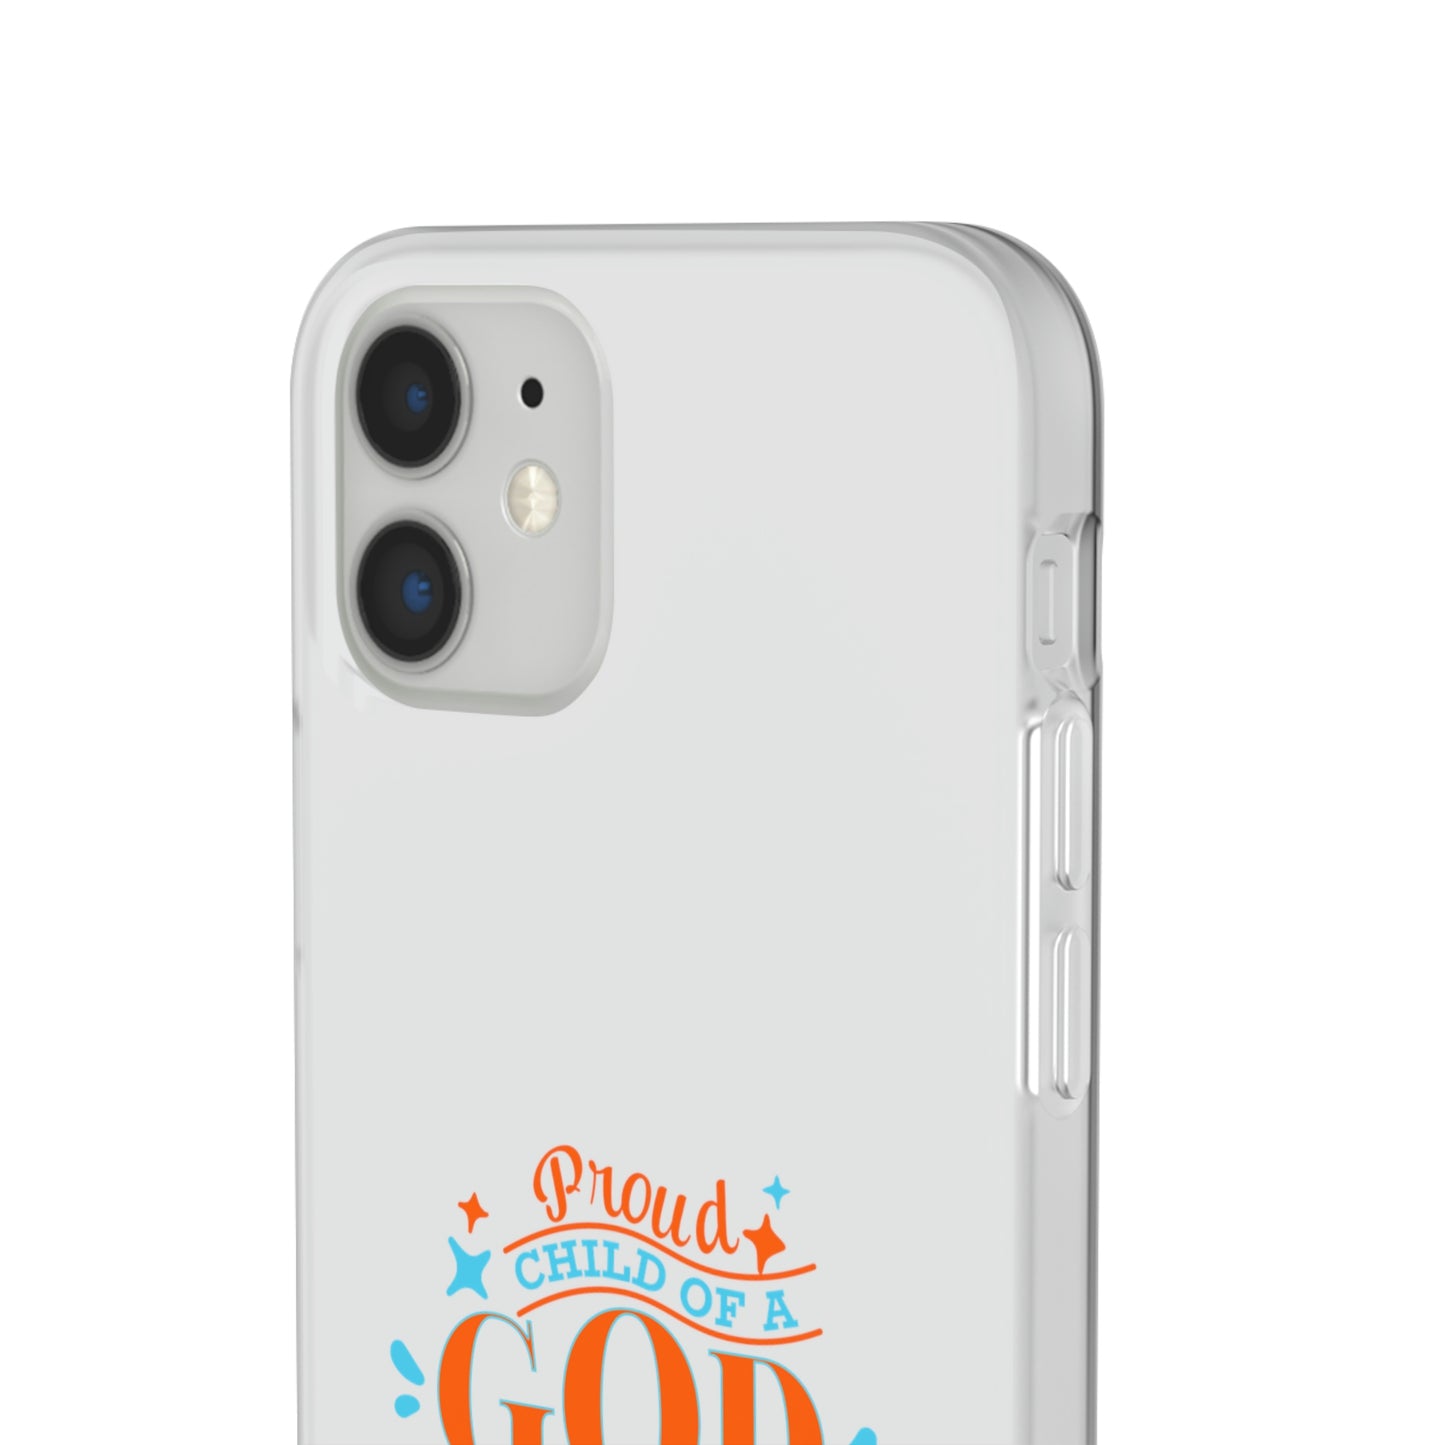 Proud Child Of A God Who Would Leave the 99 Looking For Me Flexi Phone Case